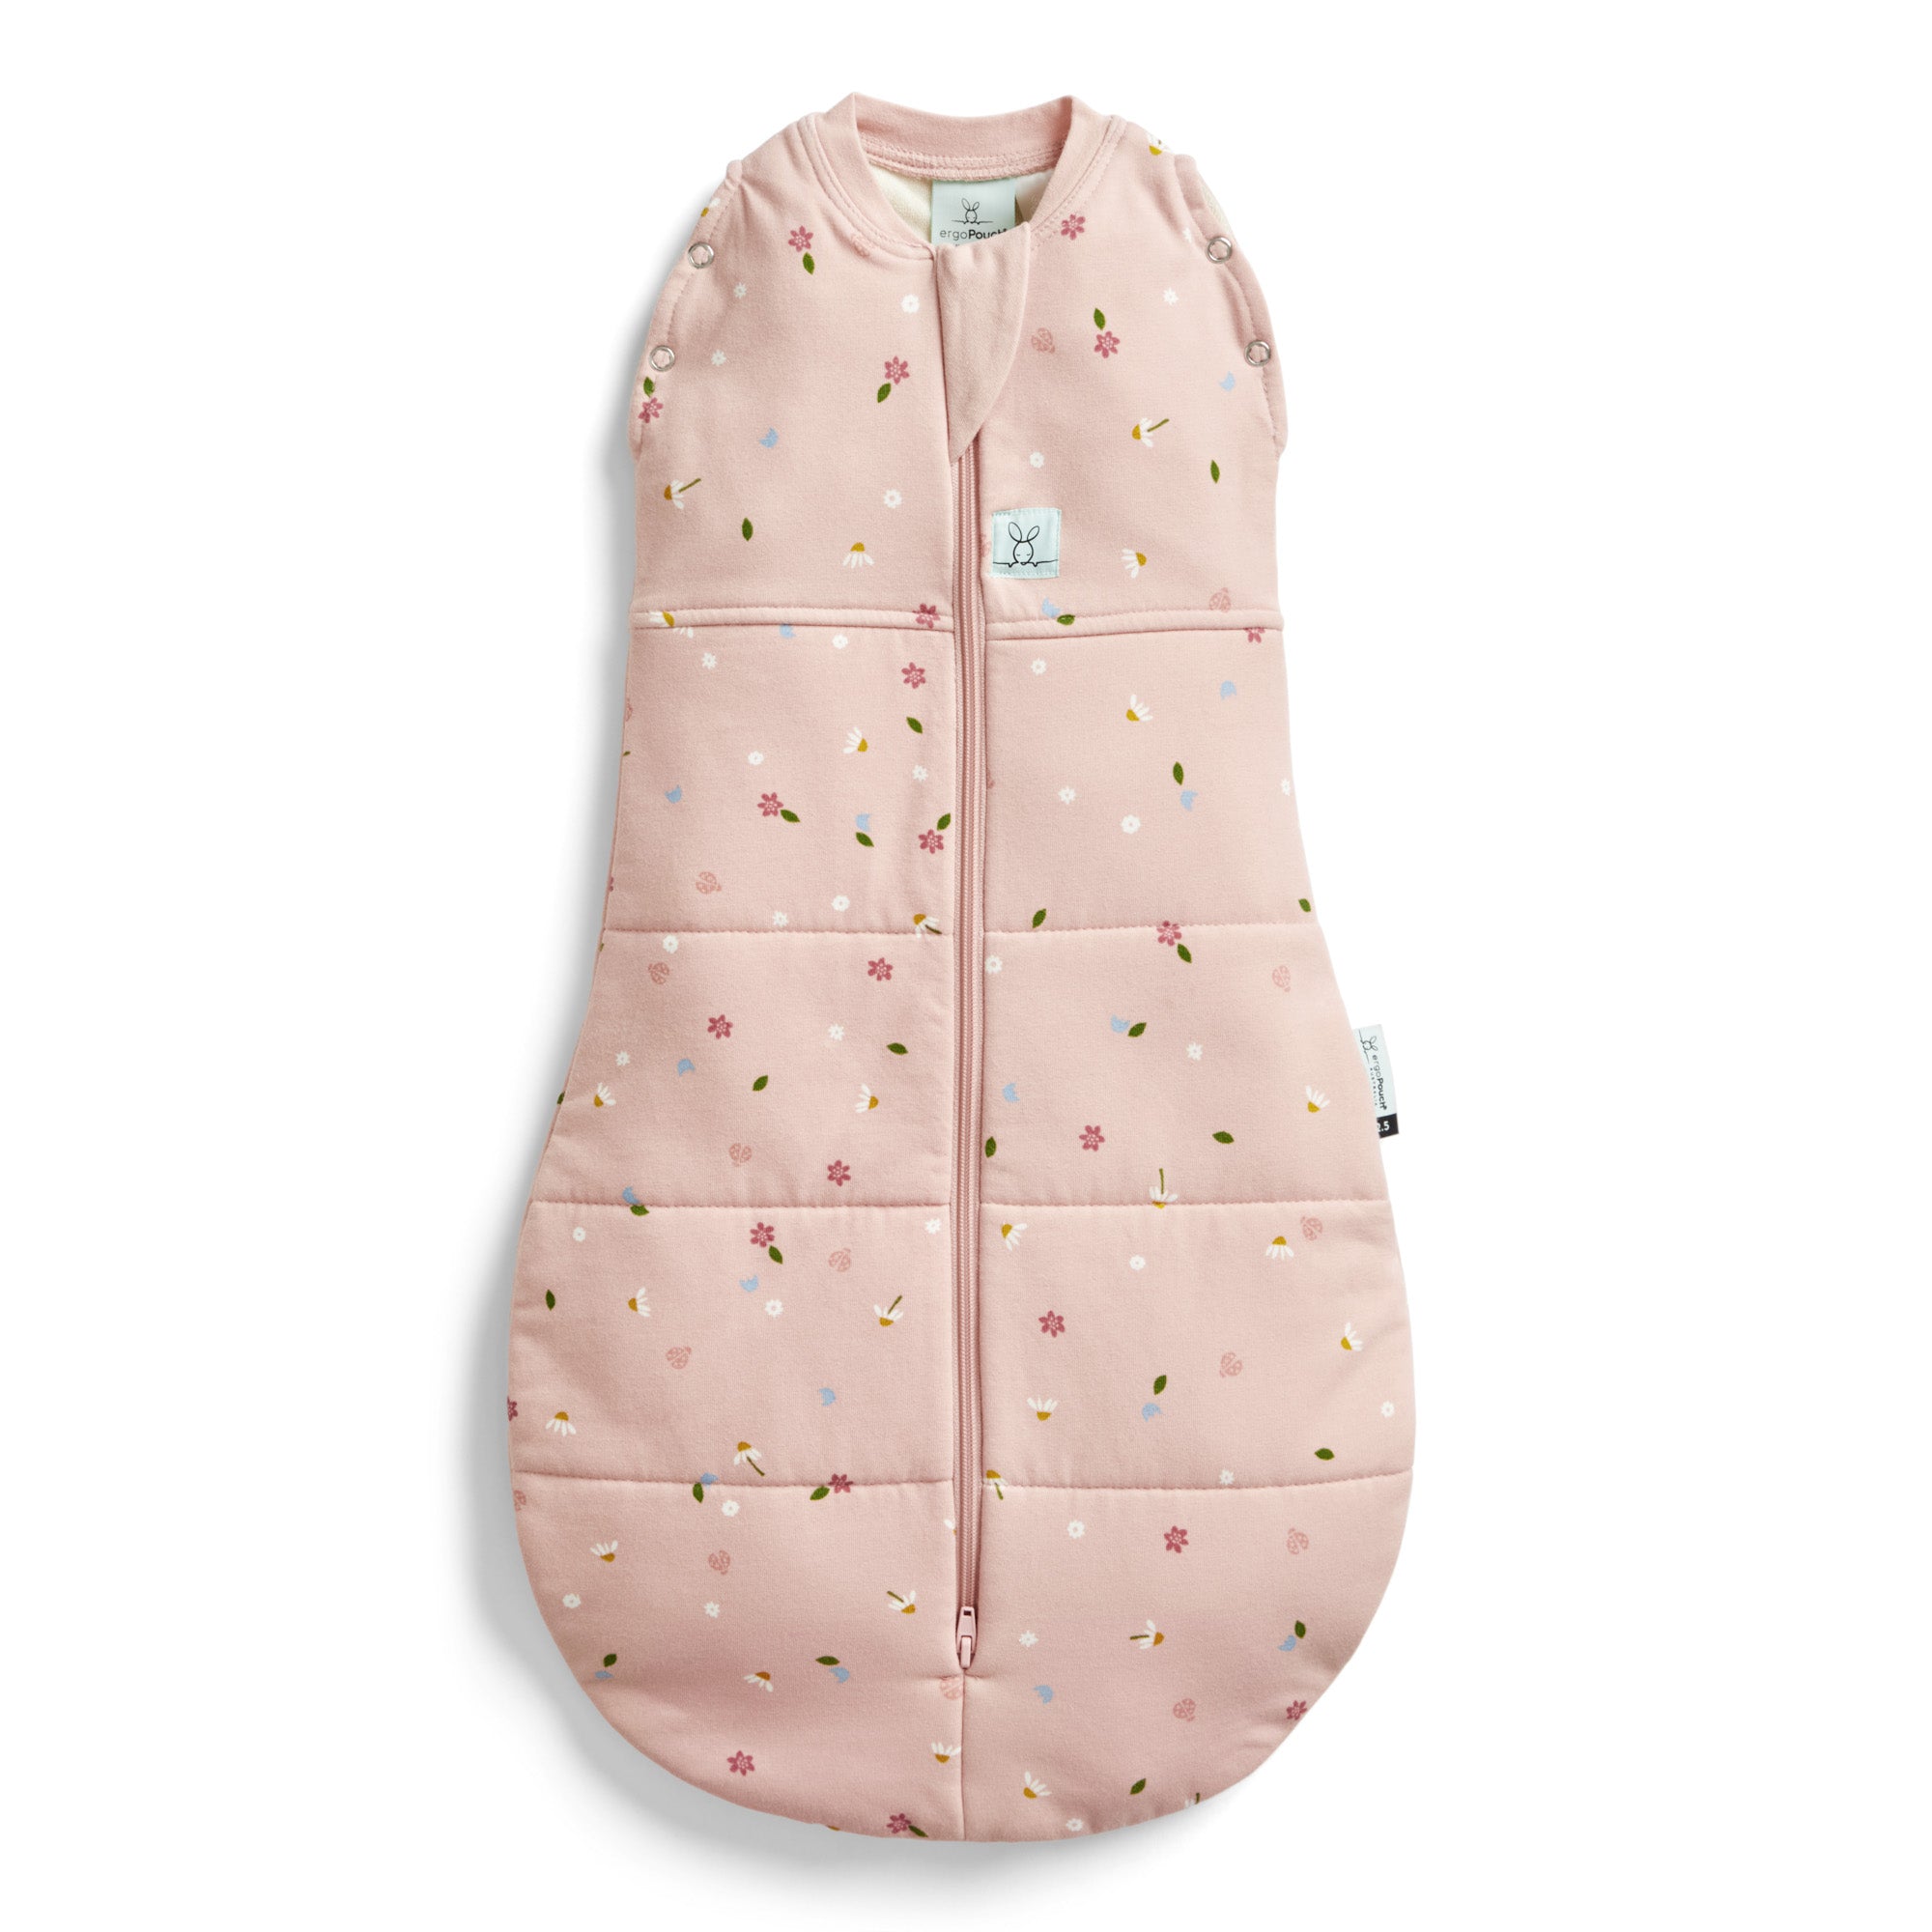 Cocoon Swaddle Bag 2.5 tog (Daisies)